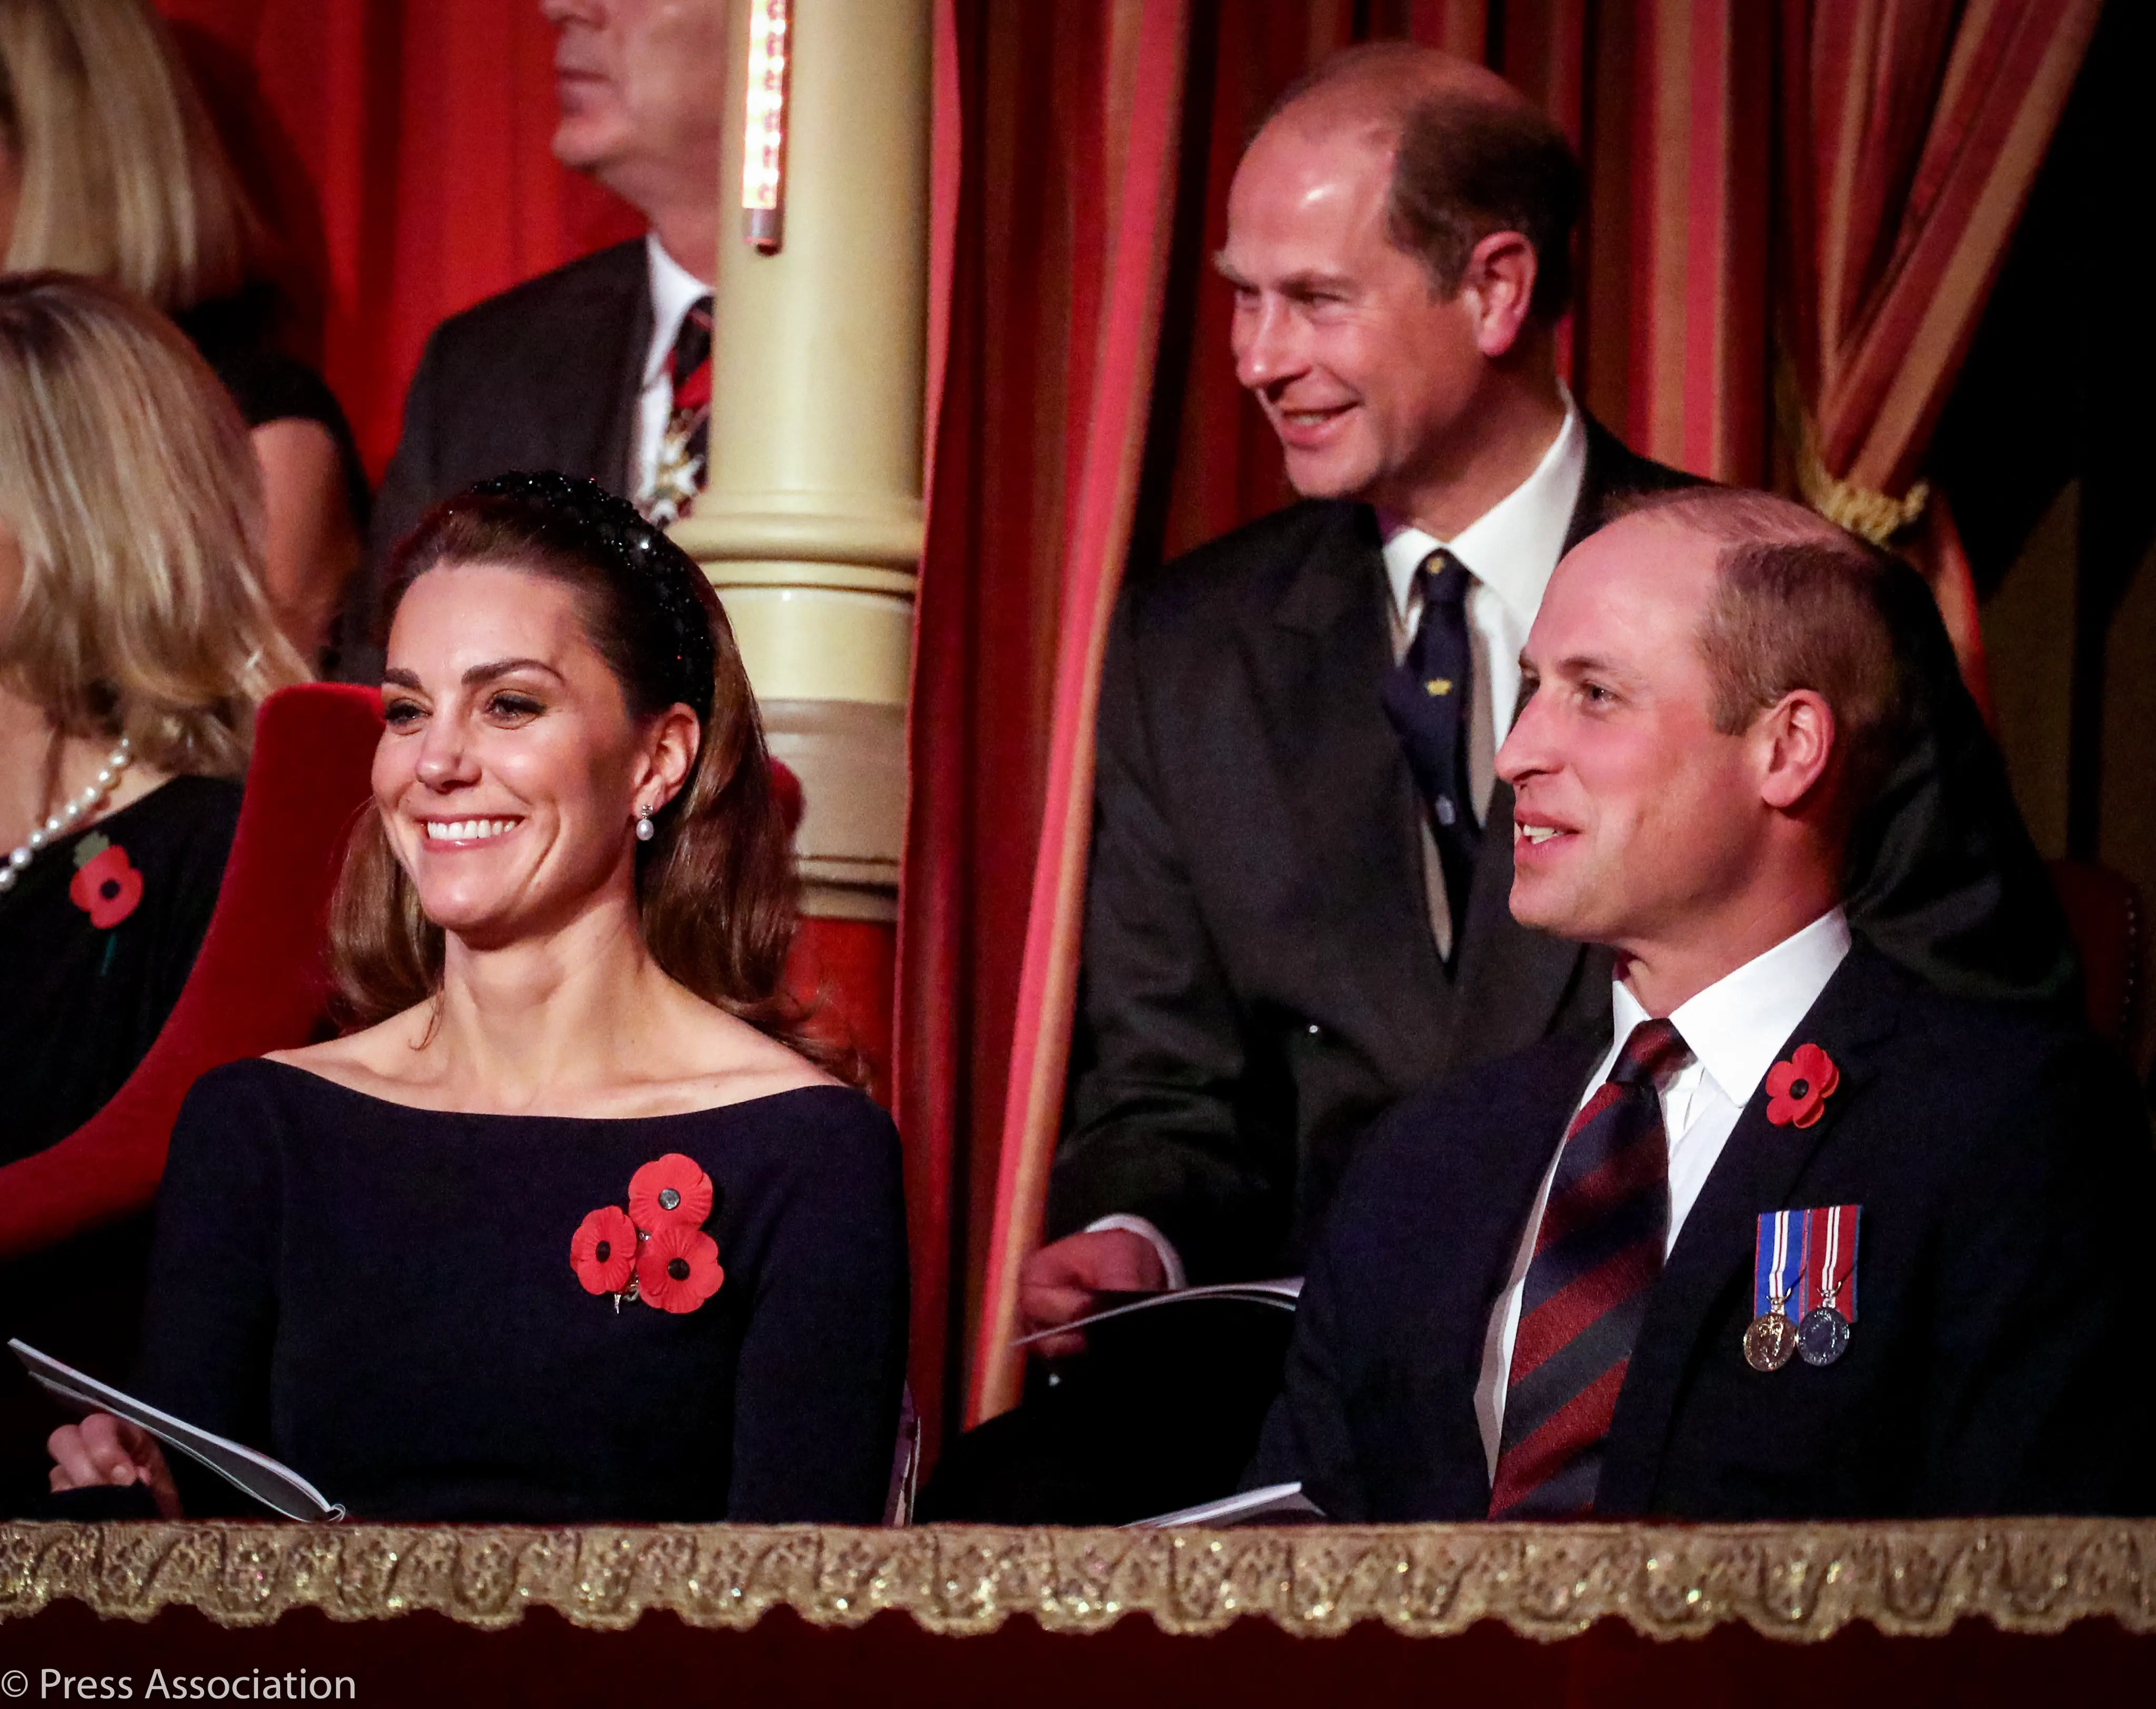 The Duke and Duchess of Cambridge attended Royal Festival of Remembrance with Royal Family